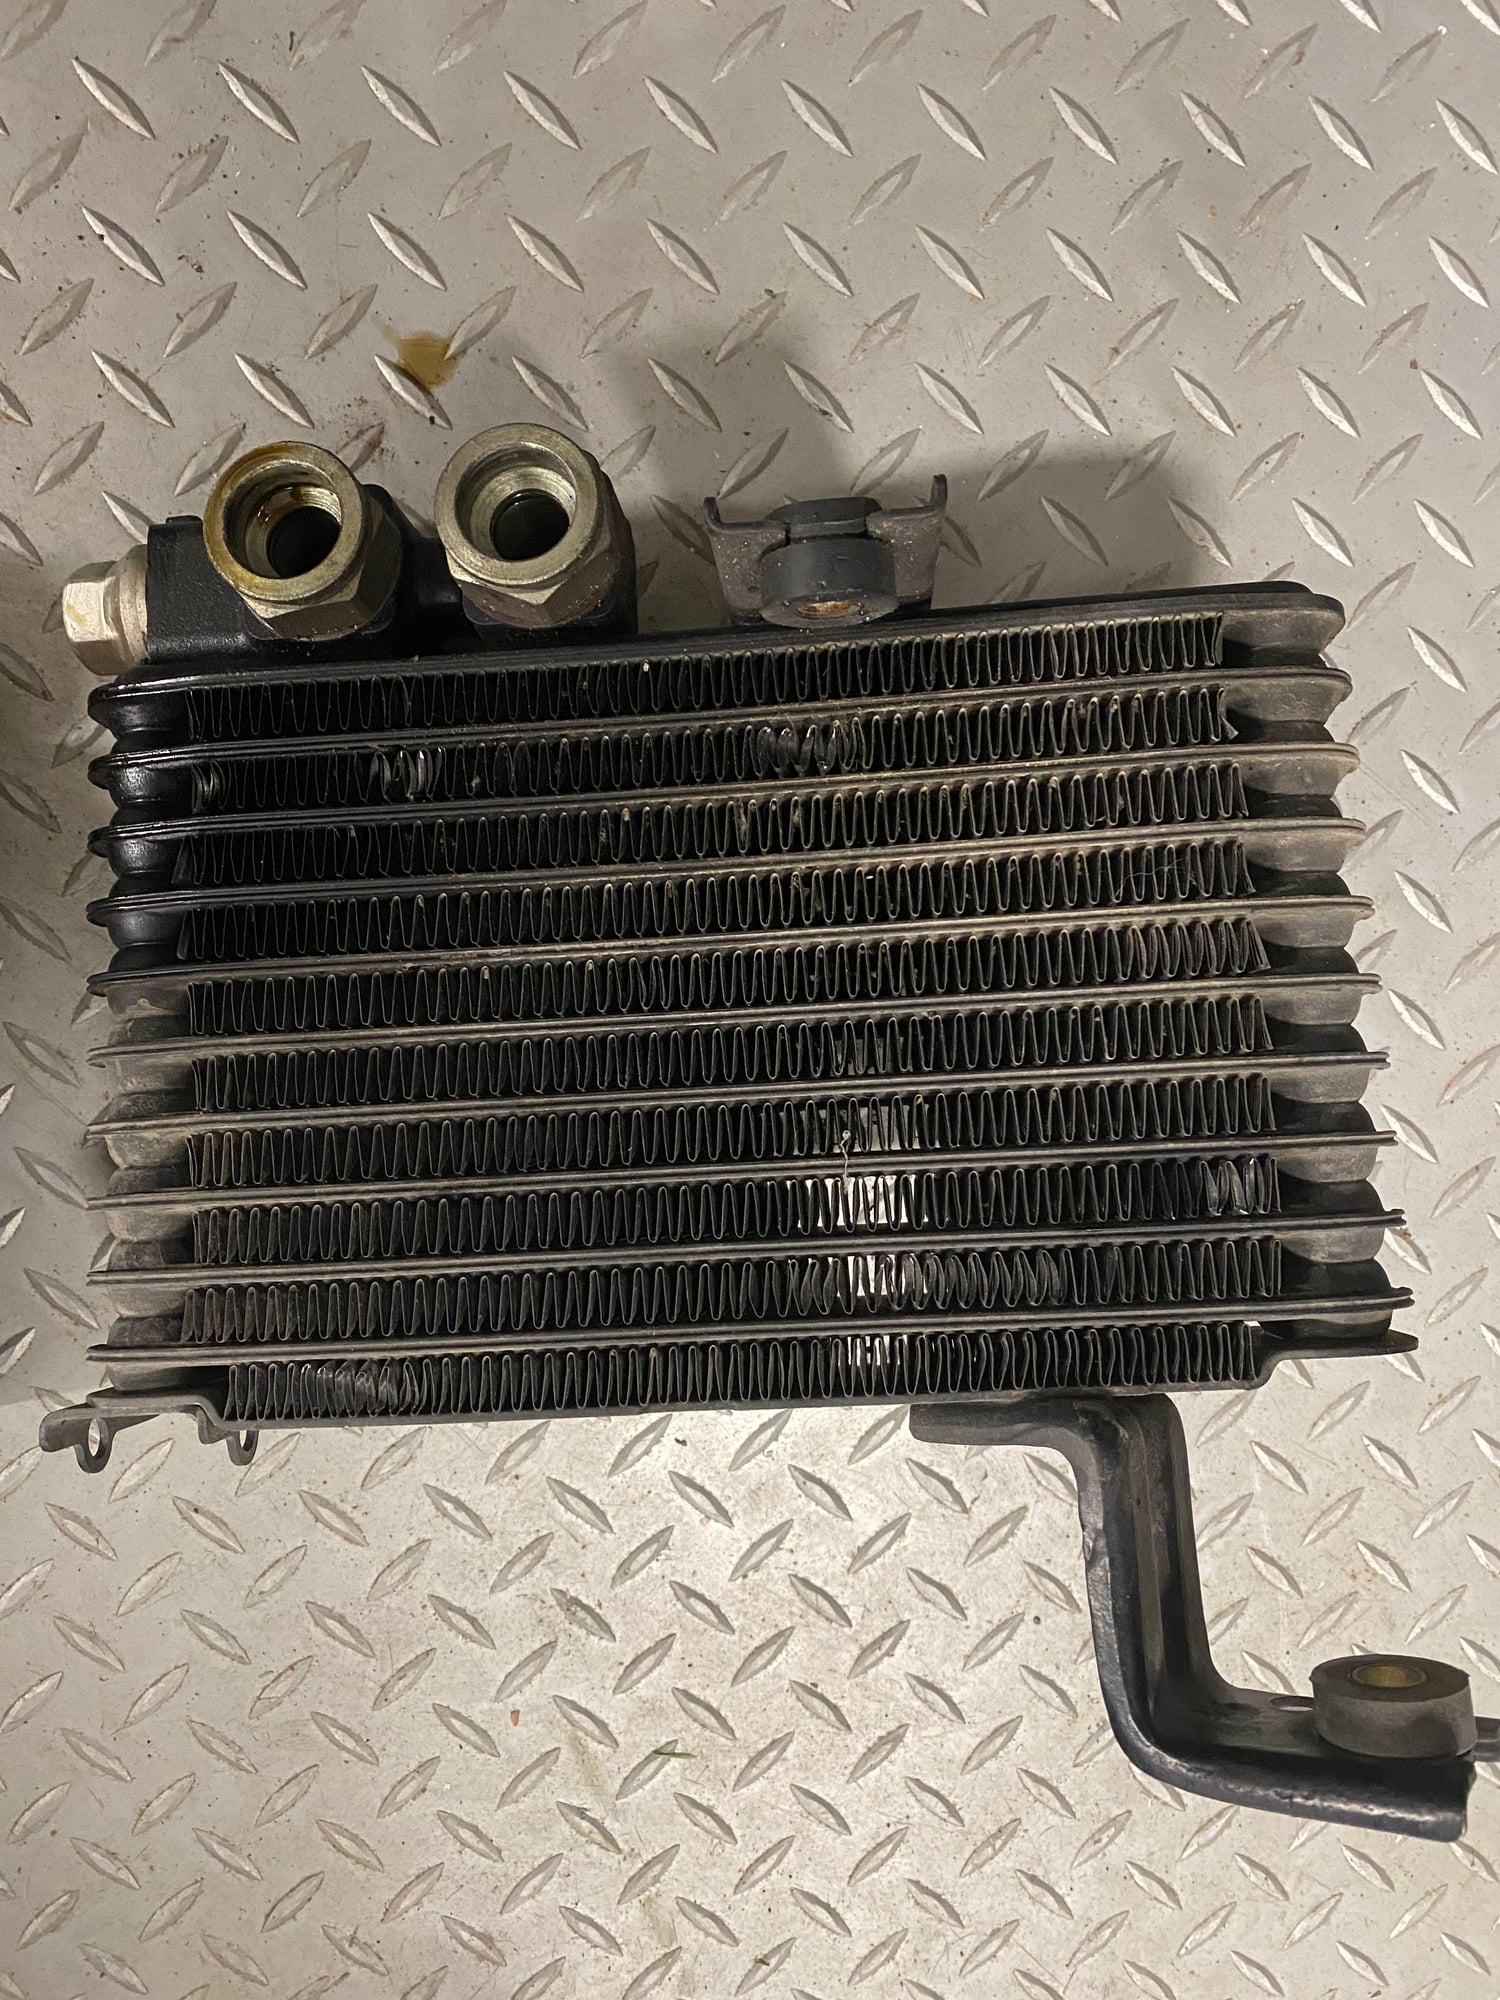 Miscellaneous - Pair R1 oil coolers - Used - 1993 to 2002 Mazda RX-7 - Vanderhoof, BC V0J3A2, Canada